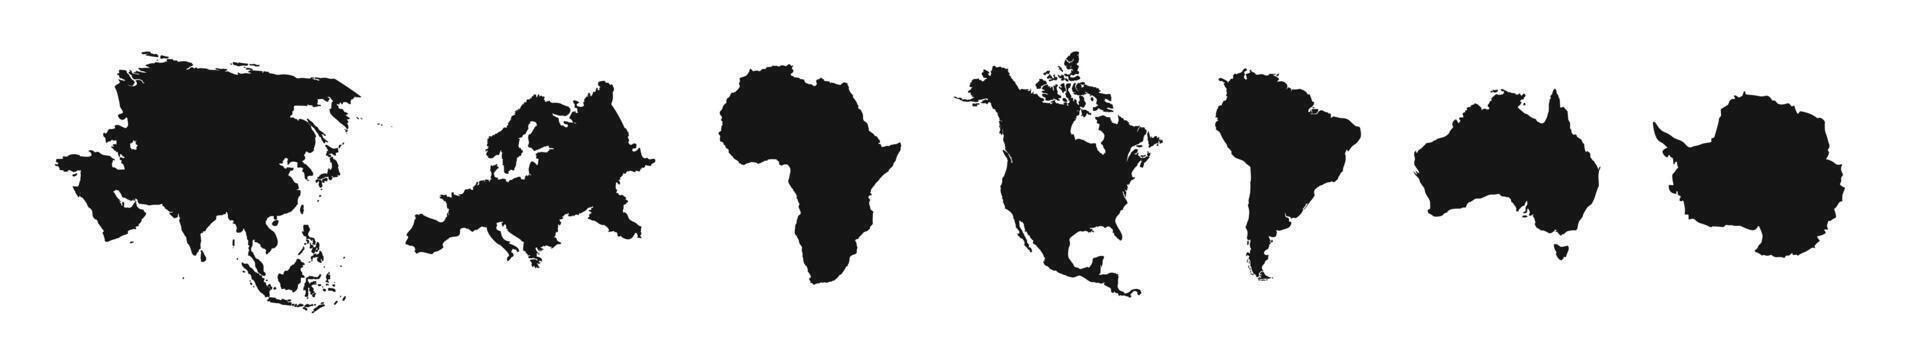 World continents silhouettes. World map icons. Europe, Asia, America, Africa, Australia continents vector